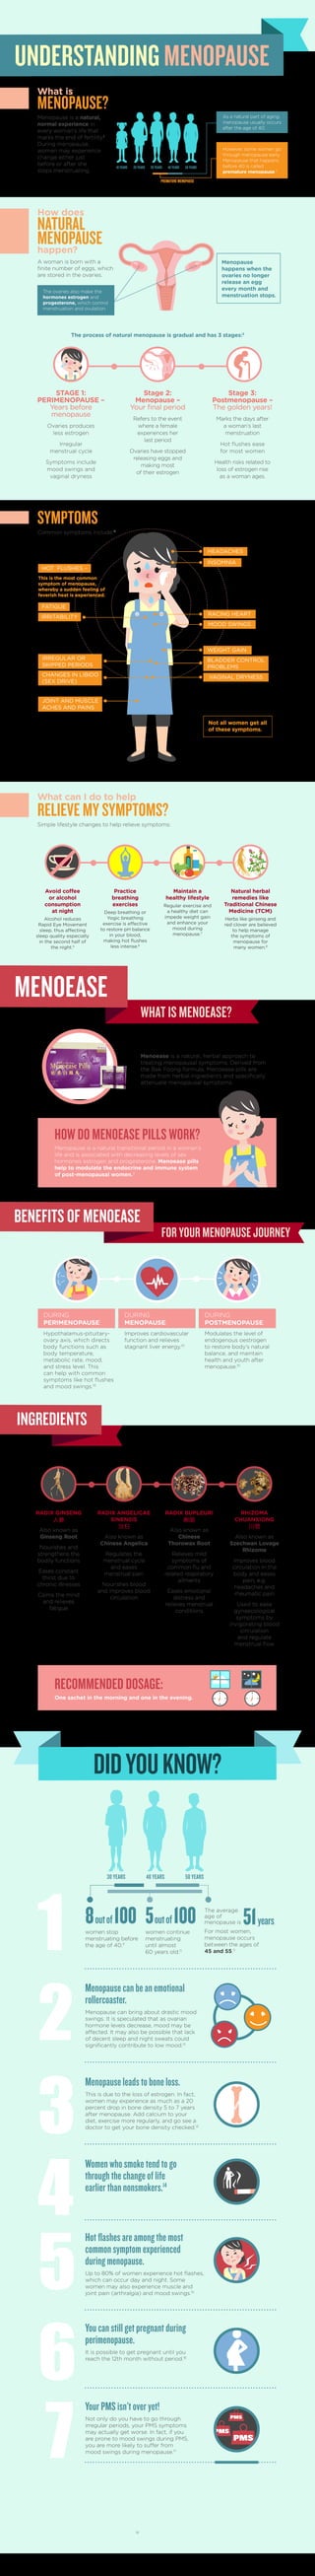 This is the most common
symptom of menopause,
whereby a sudden feeling of
feverish heat is experienced.
UNDERSTANDING MENOPAUSE
MENOEASE
BENEFITS OF MENOEASE
HEADACHES
INSOMNIA
RACING HEART
MOOD SWINGS
WEIGHT GAIN
IRREGULAR OR
SKIPPED PERIODS
CHANGES IN LIBIDO
(SEX DRIVE)
JOINT AND MUSCLE
ACHES AND PAINS
IRRITABILITY
HOT FLUSHES –
FATIGUE
VAGINAL DRYNESS
BLADDER CONTROL
PROBLEMS
HOW DO MENOEASE PILLS WORK?
Menopause is a natural transitional period in a woman’s
life and is associated with decreasing levels of sex
hormones estrogen and progesterone. Menoease pills
help to modulate the endocrine and immune system
of post-menopausal women.9
STAGE 1:
PERIMENOPAUSE –
Years before
menopause
Ovaries produces
less estrogen
Irregular
menstrual cycle
Symptoms include
mood swings and
vaginal dryness
Stage 2:
Menopause –
Your ﬁnal period
Refers to the event
where a female
experiences her
last period
Ovaries have stopped
releasing eggs and
making most
of their estrogen
Stage 3:
Postmenopause –
The golden years!
Marks the days after
a woman’s last
menstruation
Hot ﬂushes ease
for most women
Health risks related to
loss of estrogen rise
as a woman ages.
Avoid coffee
or alcohol
consumption
at night
Alcohol reduces
Rapid Eye Movement
sleep, thus affecting
sleep quality especially
in the second half of
the night.5
Practice
breathing
exercises
Deep breathing or
Yogic breathing
exercise is effective
to restore pH balance
in your blood,
making hot ﬂushes
less intense.6
Maintain a
healthy lifestyle
Regular exercise and
a healthy diet can
impede weight gain
and enhance your
mood during
menopause.7
Natural herbal
remedies like
Traditional Chinese
Medicine (TCM)
Herbs like ginseng and
red clover are believed
to help manage
the symptoms of
menopause for
many women.8
What is
MENOPAUSE?
Menopause is a natural,
normal experience in
every woman’s life that
marks the end of fertility.1
During menopause,
women may experience
change either just
before or after she
stops menstruating.
As a natural part of aging,
menopause usually occurs
after the age of 40.
The ovaries also make the
hormones estrogen and
progesterone, which control
menstruation and ovulation.
However, some women go
through menopause early.
Menopause that happens
before 40 is called
premature menopause.2
PREMATURE MENOPAUSE
How does
NATURAL
MENOPAUSEhappen?
A woman is born with a
ﬁnite number of eggs, which
are stored in the ovaries.
What can I do to help
RELIEVE MY SYMPTOMS?
Simple lifestyle changes to help relieve symptoms:
DURING
PERIMENOPAUSE:
Hypothalamus-pituitary-
ovary axis, which directs
body functions such as
body temperature,
metabolic rate, mood,
and stress level. This
can help with common
symptoms like hot ﬂushes
and mood swings.10
DURING
MENOPAUSE:
Improves cardiovascular
function and relieves
stagnant liver energy.10
DURING
POSTMENOPAUSE:
Modulates the level of
endogenous oestrogen
to restore body’s natural
balance, and maintain
health and youth after
menopause.10
Menoease is a natural, herbal approach to
treating menopausal symptoms. Derived from
the Bak Foong formula, Menoease pills are
made from herbal ingredients and speciﬁcally
attenuate menopausal symptoms.
SYMPTOMS
Common symptoms include:4
Menopause
happens when the
ovaries no longer
release an egg
every month and
menstruation stops.
Not all women get all
of these symptoms.
The process of natural menopause is gradual and has 3 stages:3
10 YEARS 20 YEARS 30 YEARS 40 YEARS 50 YEARS
WHAT IS MENOEASE?
FOR YOUR MENOPAUSE JOURNEY
INGREDIENTS
RECOMMENDED DOSAGE:
One sachet in the morning and one in the evening.
RADIX GINSENG
人参
Also known as
Ginseng Root
Nourishes and
strengthens the
bodily functions
Eases constant
thirst due to
chronic illnesses
Calms the mind
and relieves
fatigue
RADIX ANGELICAE
SINENSIS
当归
Also known as
Chinese Angelica
Regulates the
menstrual cycle
and eases
menstrual pain
Nourishes blood
and improves blood
circulation
RADIX BUPLEURI
柴胡
Also known as
Chinese
Thorowax Root
Relieves mild
symptoms of
common ﬂu and
related respiratory
ailments
Eases emotional
distress and
relieves menstrual
conditions
RHIZOMA
CHUANXIONG
川芎
Also known as
Szechwan Lovage
Rhizome
Improves blood
circulation in the
body and eases
pain, e.g.
headaches and
rheumatic pain
Used to ease
gynaecological
symptoms by
invigorating blood
circulation
and regulate
menstrual ﬂow
1
DIDYOUKNOW?
2
3
Menopause can be an emotional
rollercoaster.
Menopause can bring about drastic mood
swings. It is speculated that as ovarian
hormone levels decrease, mood may be
affected. It may also be possible that lack
of decent sleep and night sweats could
signiﬁcantly contribute to low mood.12
Menopause leads to bone loss.
This is due to the loss of estrogen. In fact,
women may experience as much as a 20
percent drop in bone density 5 to 7 years
after menopause. Add calcium to your
diet, exercise more regularly, and go see a
doctor to get your bone density checked.13
For more information: EuYanSang.com
8outof100women stop
menstruating before
the age of 40.11
5outof100women continue
menstruating
until almost
60 years old.11
The average
age of
menopause is
For most women,
menopause occurs
between the ages of
45 and 55.11
51years.
30 YEARS 40 YEARS 50 YEARS
5
Hot ﬂashes are among the most
common symptom experienced
during menopause.
Up to 80% of women experience hot ﬂashes,
which can occur day and night. Some
women may also experience muscle and
joint pain (arthralgia) and mood swings.15
4
Women who smoke tend to go
through the change of life
earlier than nonsmokers.14
6
You can still get pregnant during
perimenopause.
It is possible to get pregnant until you
reach the 12th month without period.16
7
Your PMS isn't over yet!
Not only do you have to go through
irregular periods, your PMS symptoms
may actually get worse. In fact, if you
are prone to mood swings during PMS,
you are more likely to suffer from
mood swings during menopause.17
PMS
PMS
PMS
8
How about men?
Men do not experience menopause,
but they do go through a similar
phase called “aging male syndrome,”
or “andropause.” Andropause is
attributed to a gradual decline in
testosterone levels.18
 